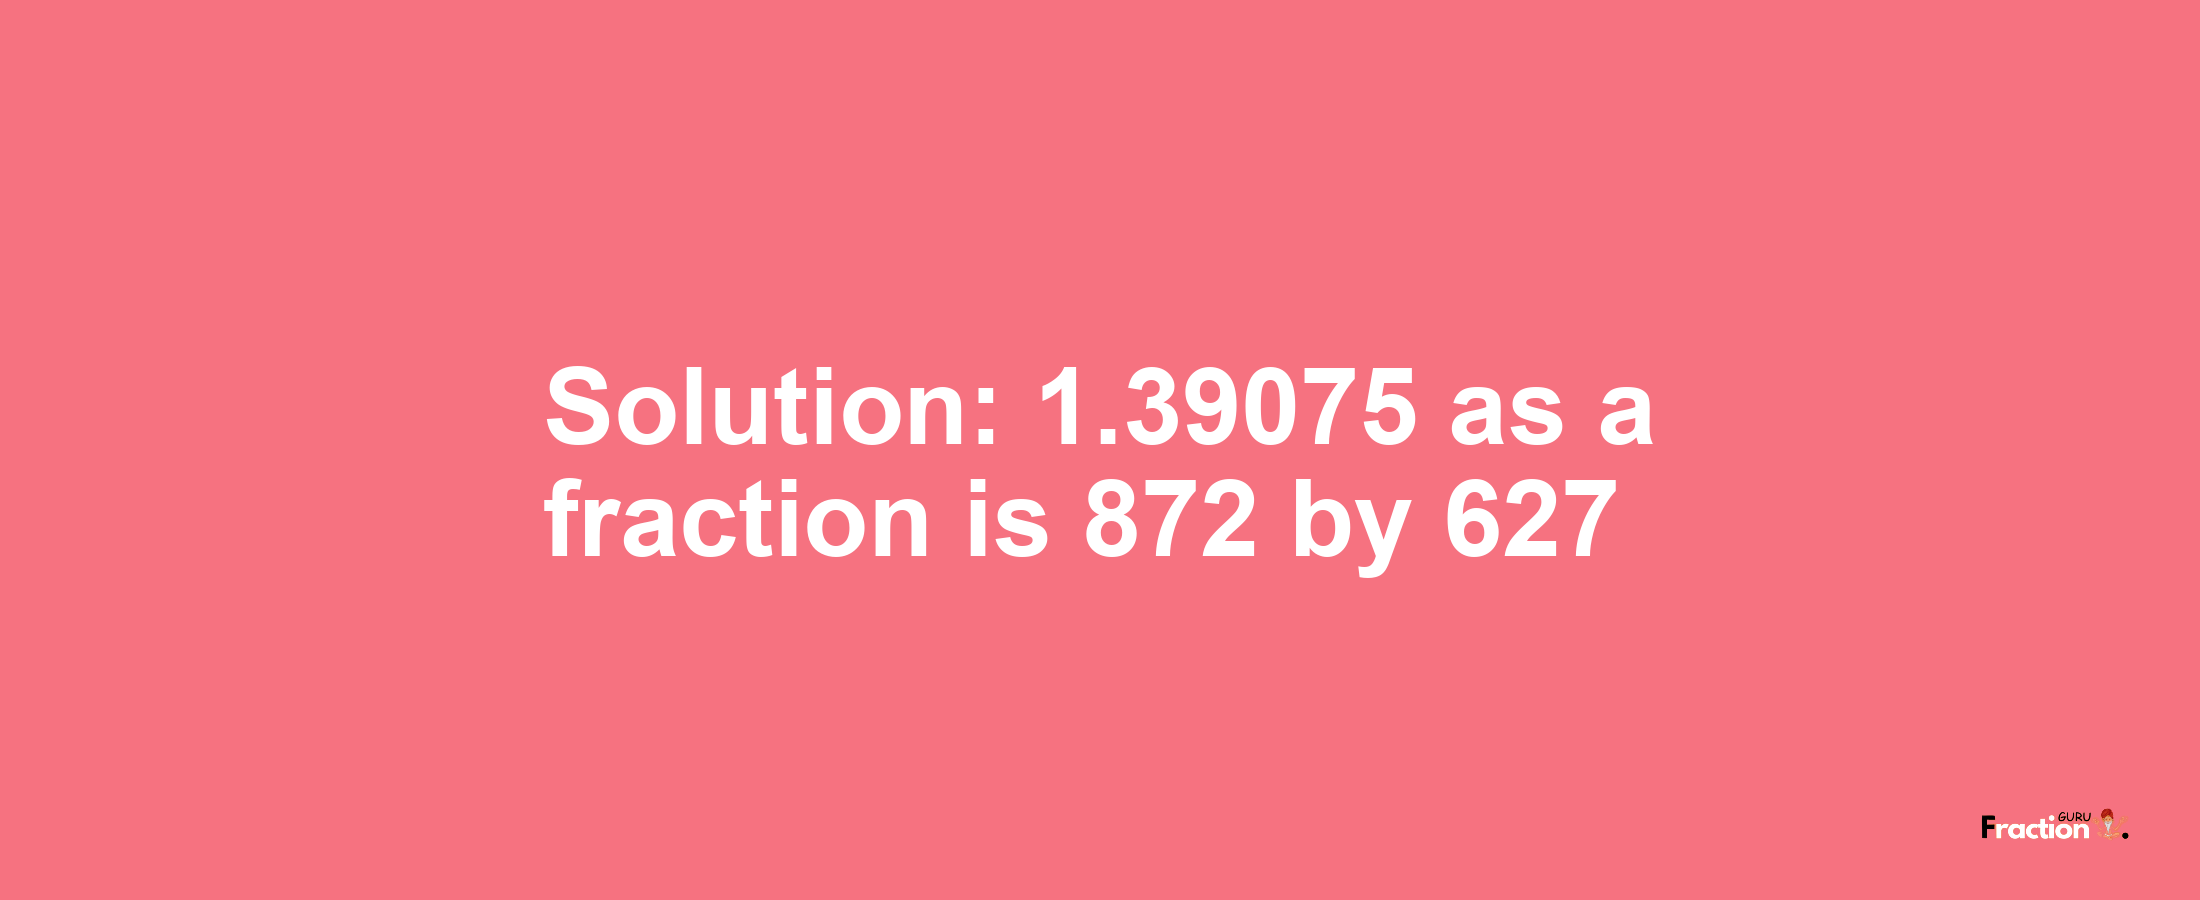 Solution:1.39075 as a fraction is 872/627